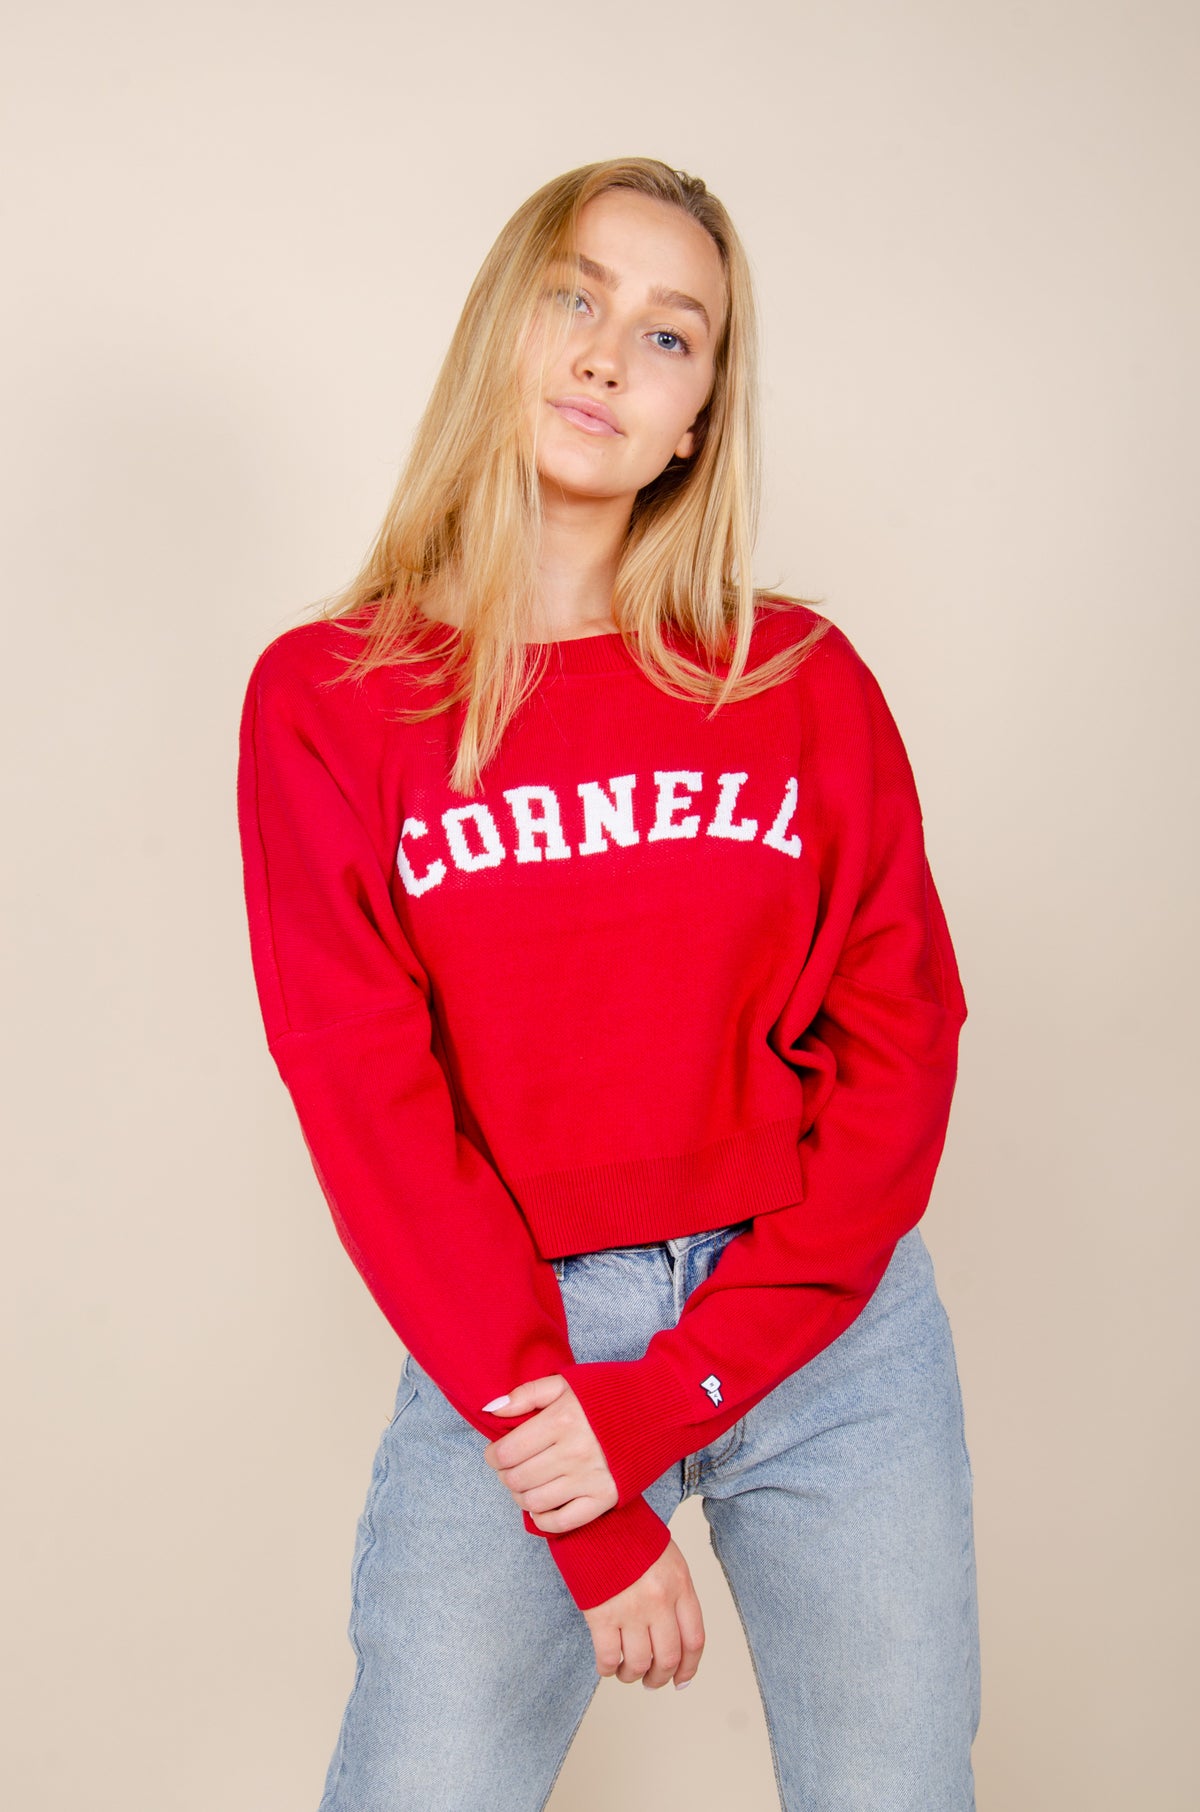 Cornell Ivy Knitted Sweater